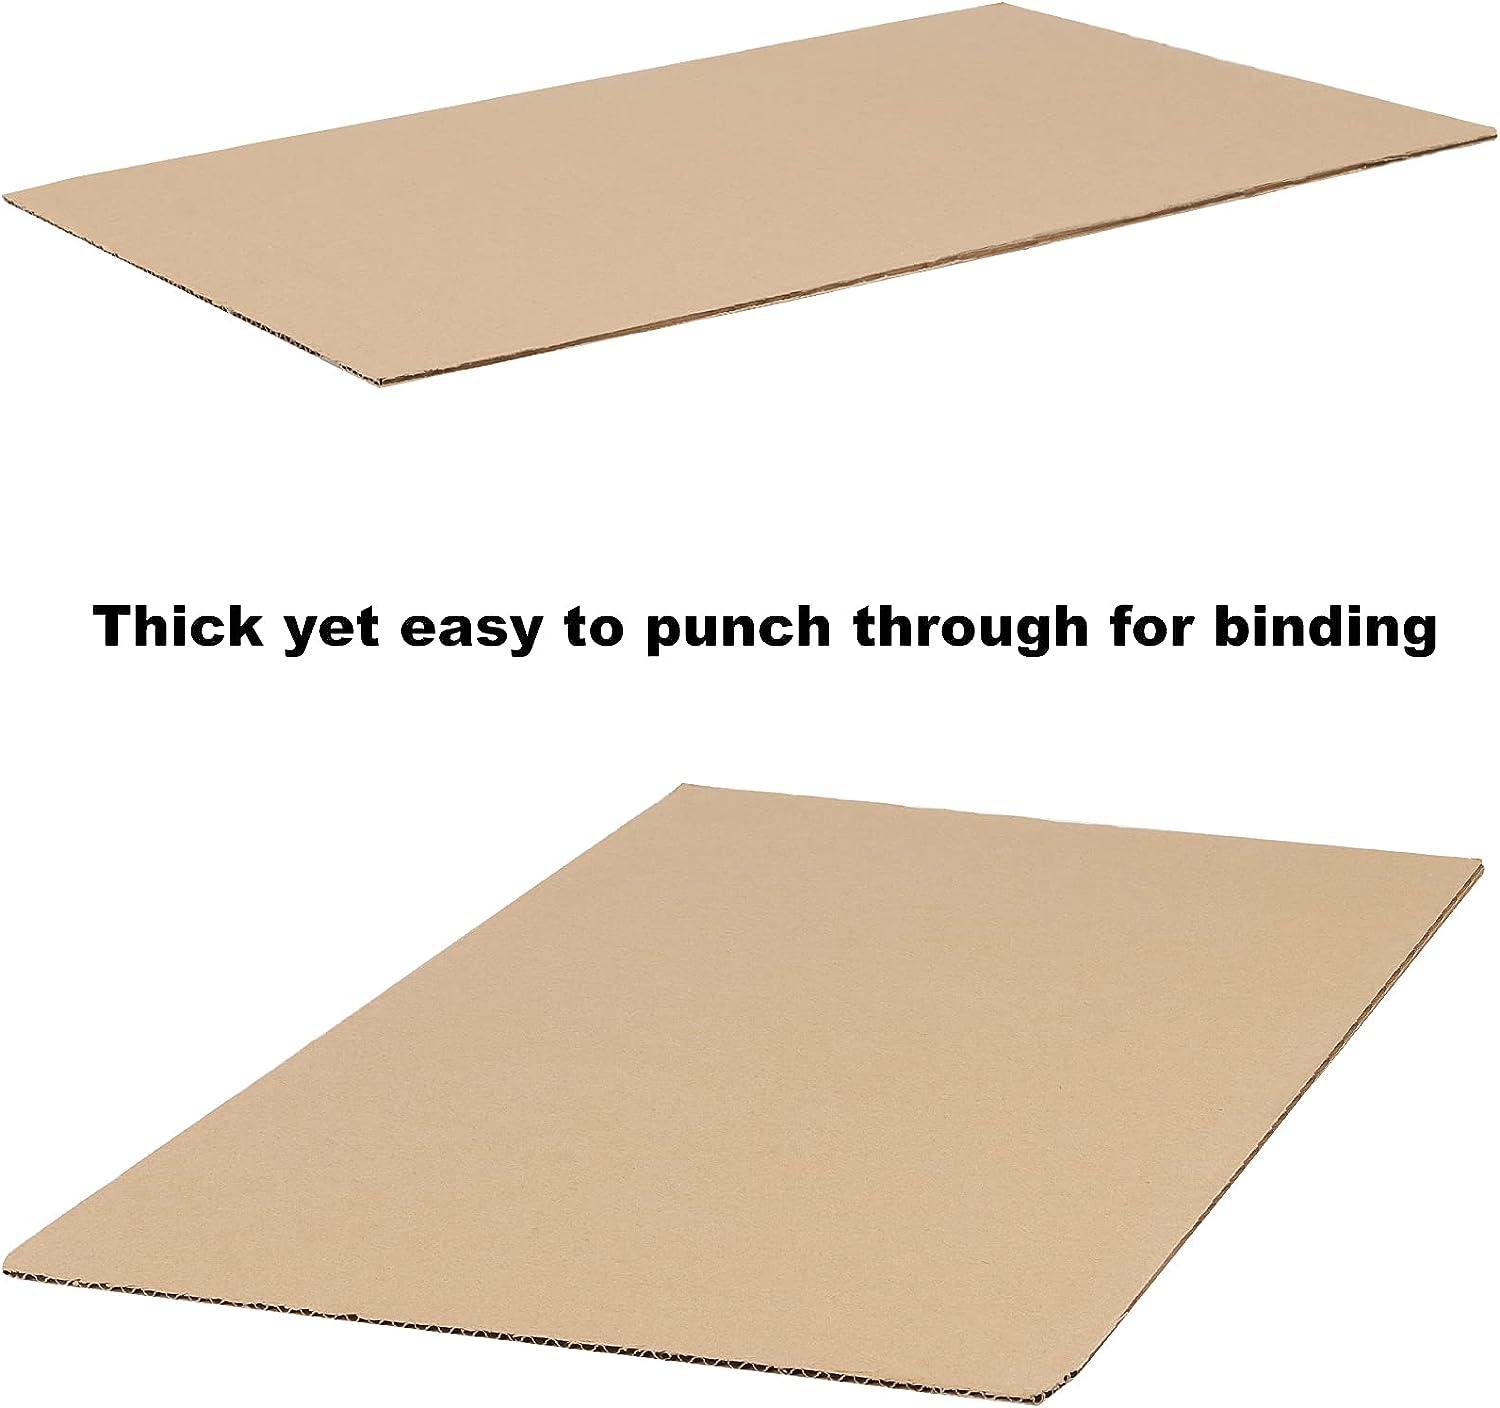 Custom Size Chip Board Sheets for Binding, Crafts, + More